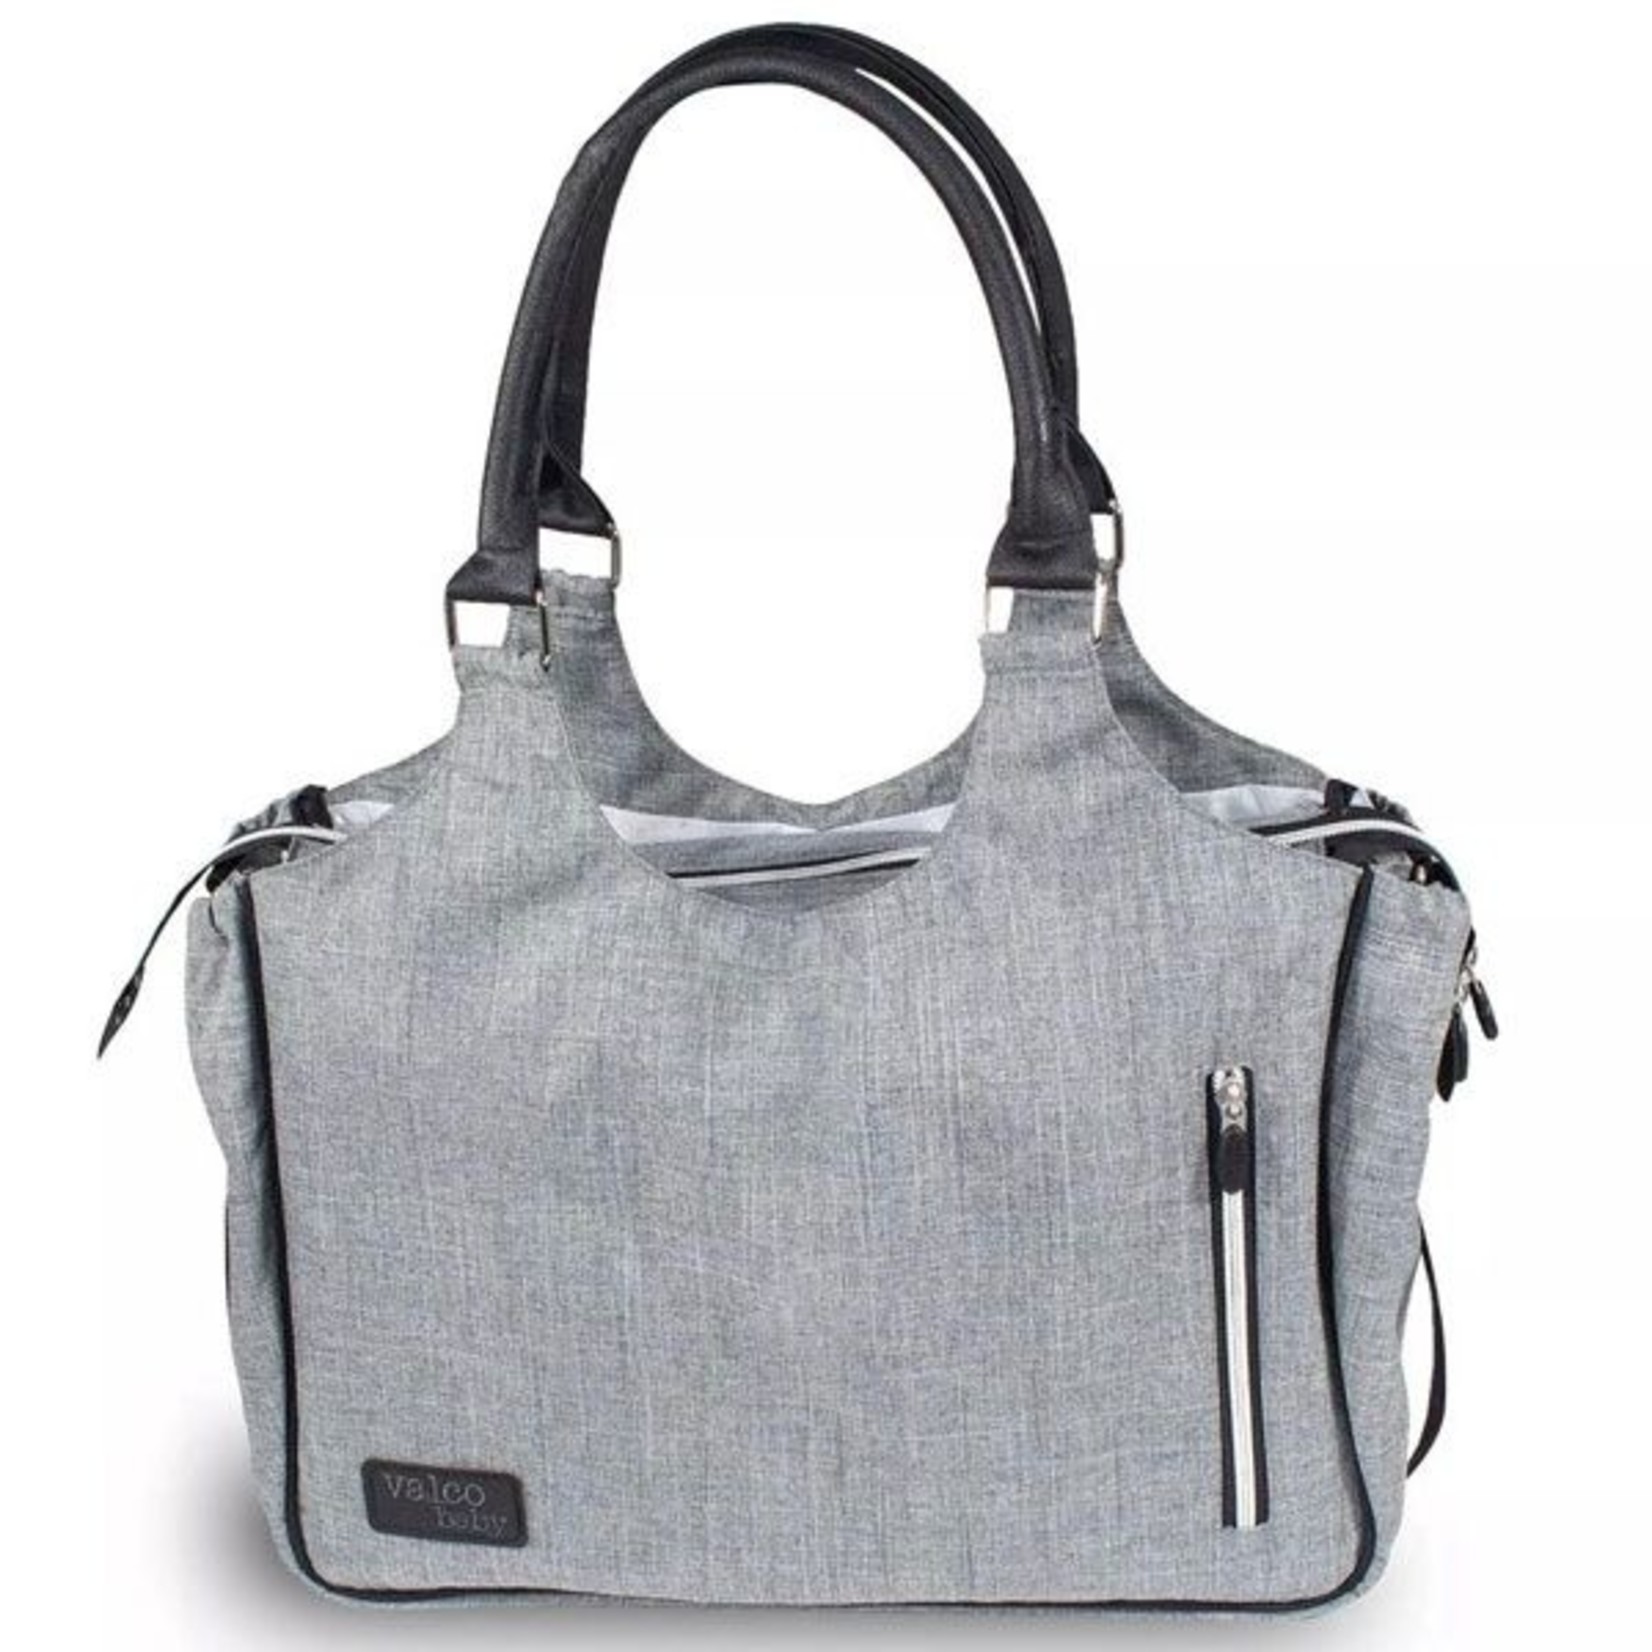 Valco Baby Mothers Bag-Grey Marle